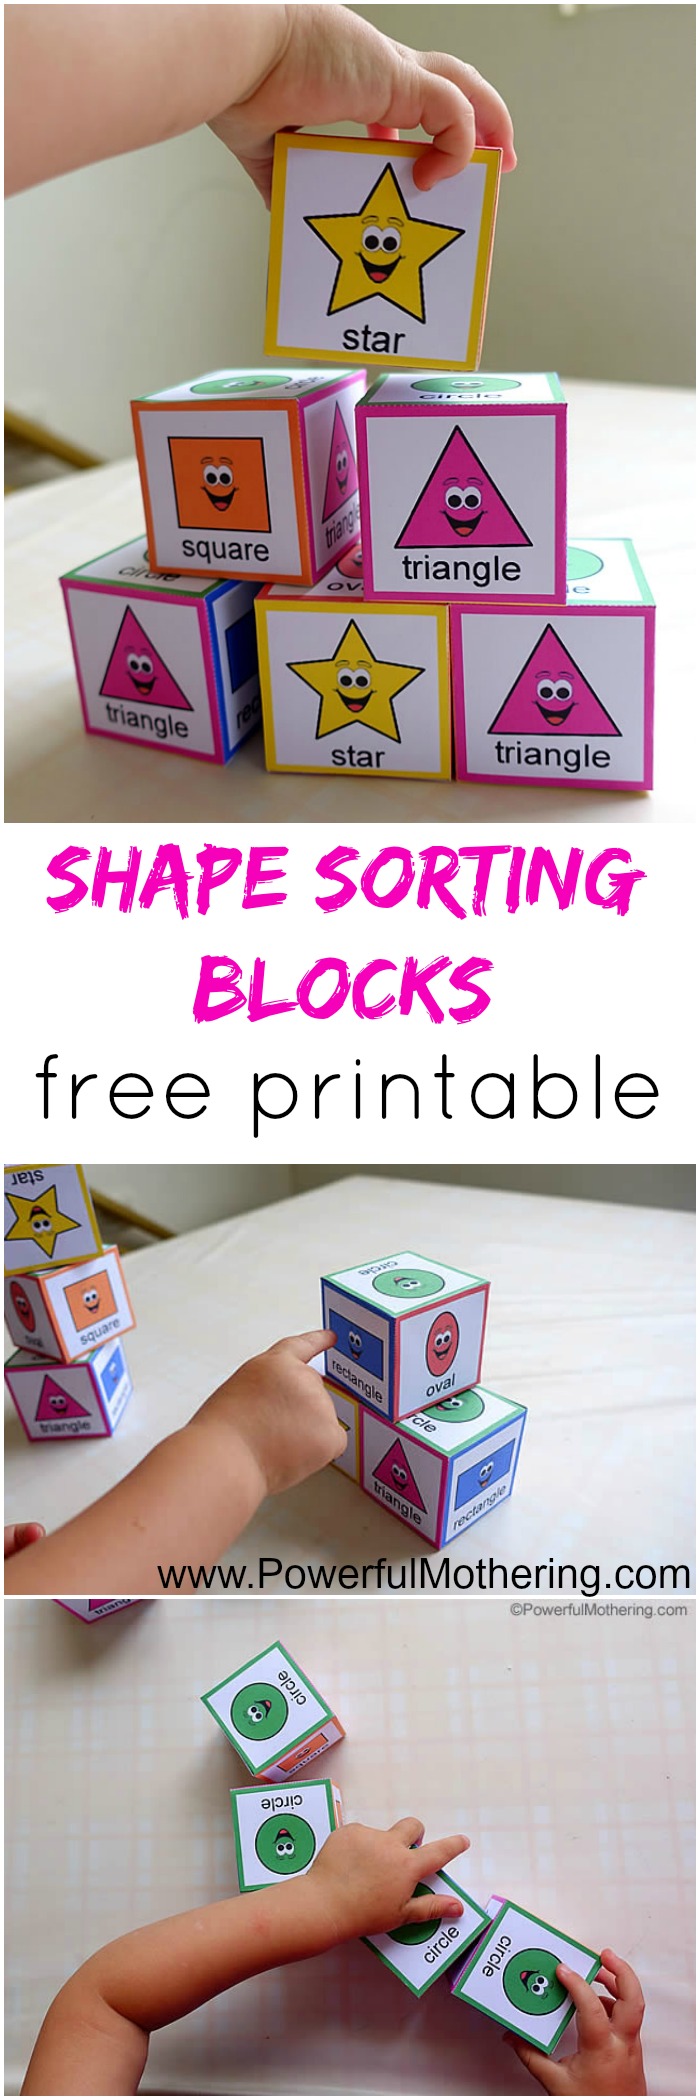 shape sorting blocks with free printable from PowerfulMothering.com